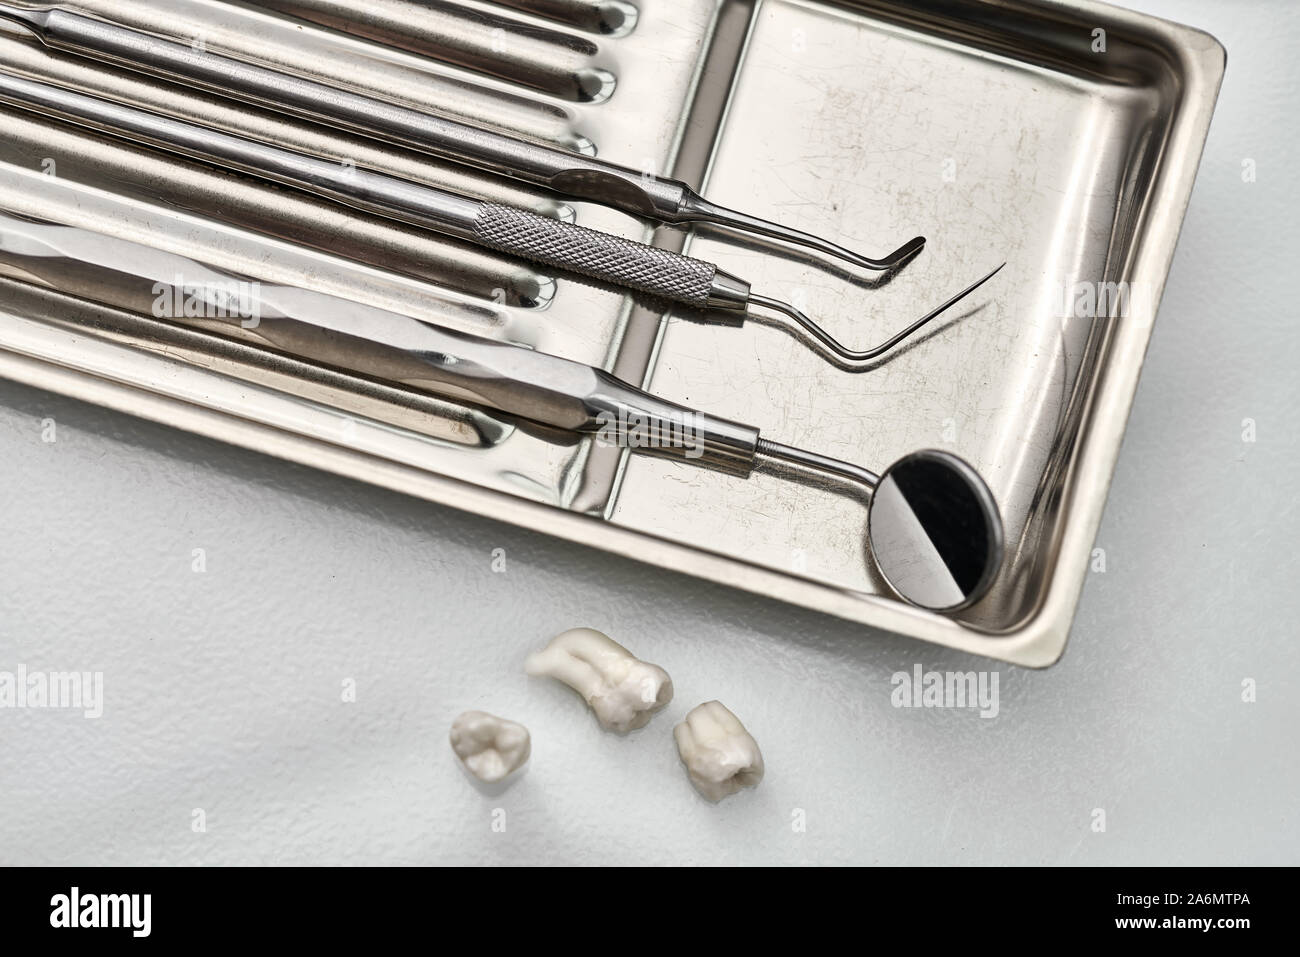 Stainless steel medical tray with dental instruments (mirror, probe, scrapers) and three extracted molar teeth next to it. Closeup horizontal photo. Stock Photo